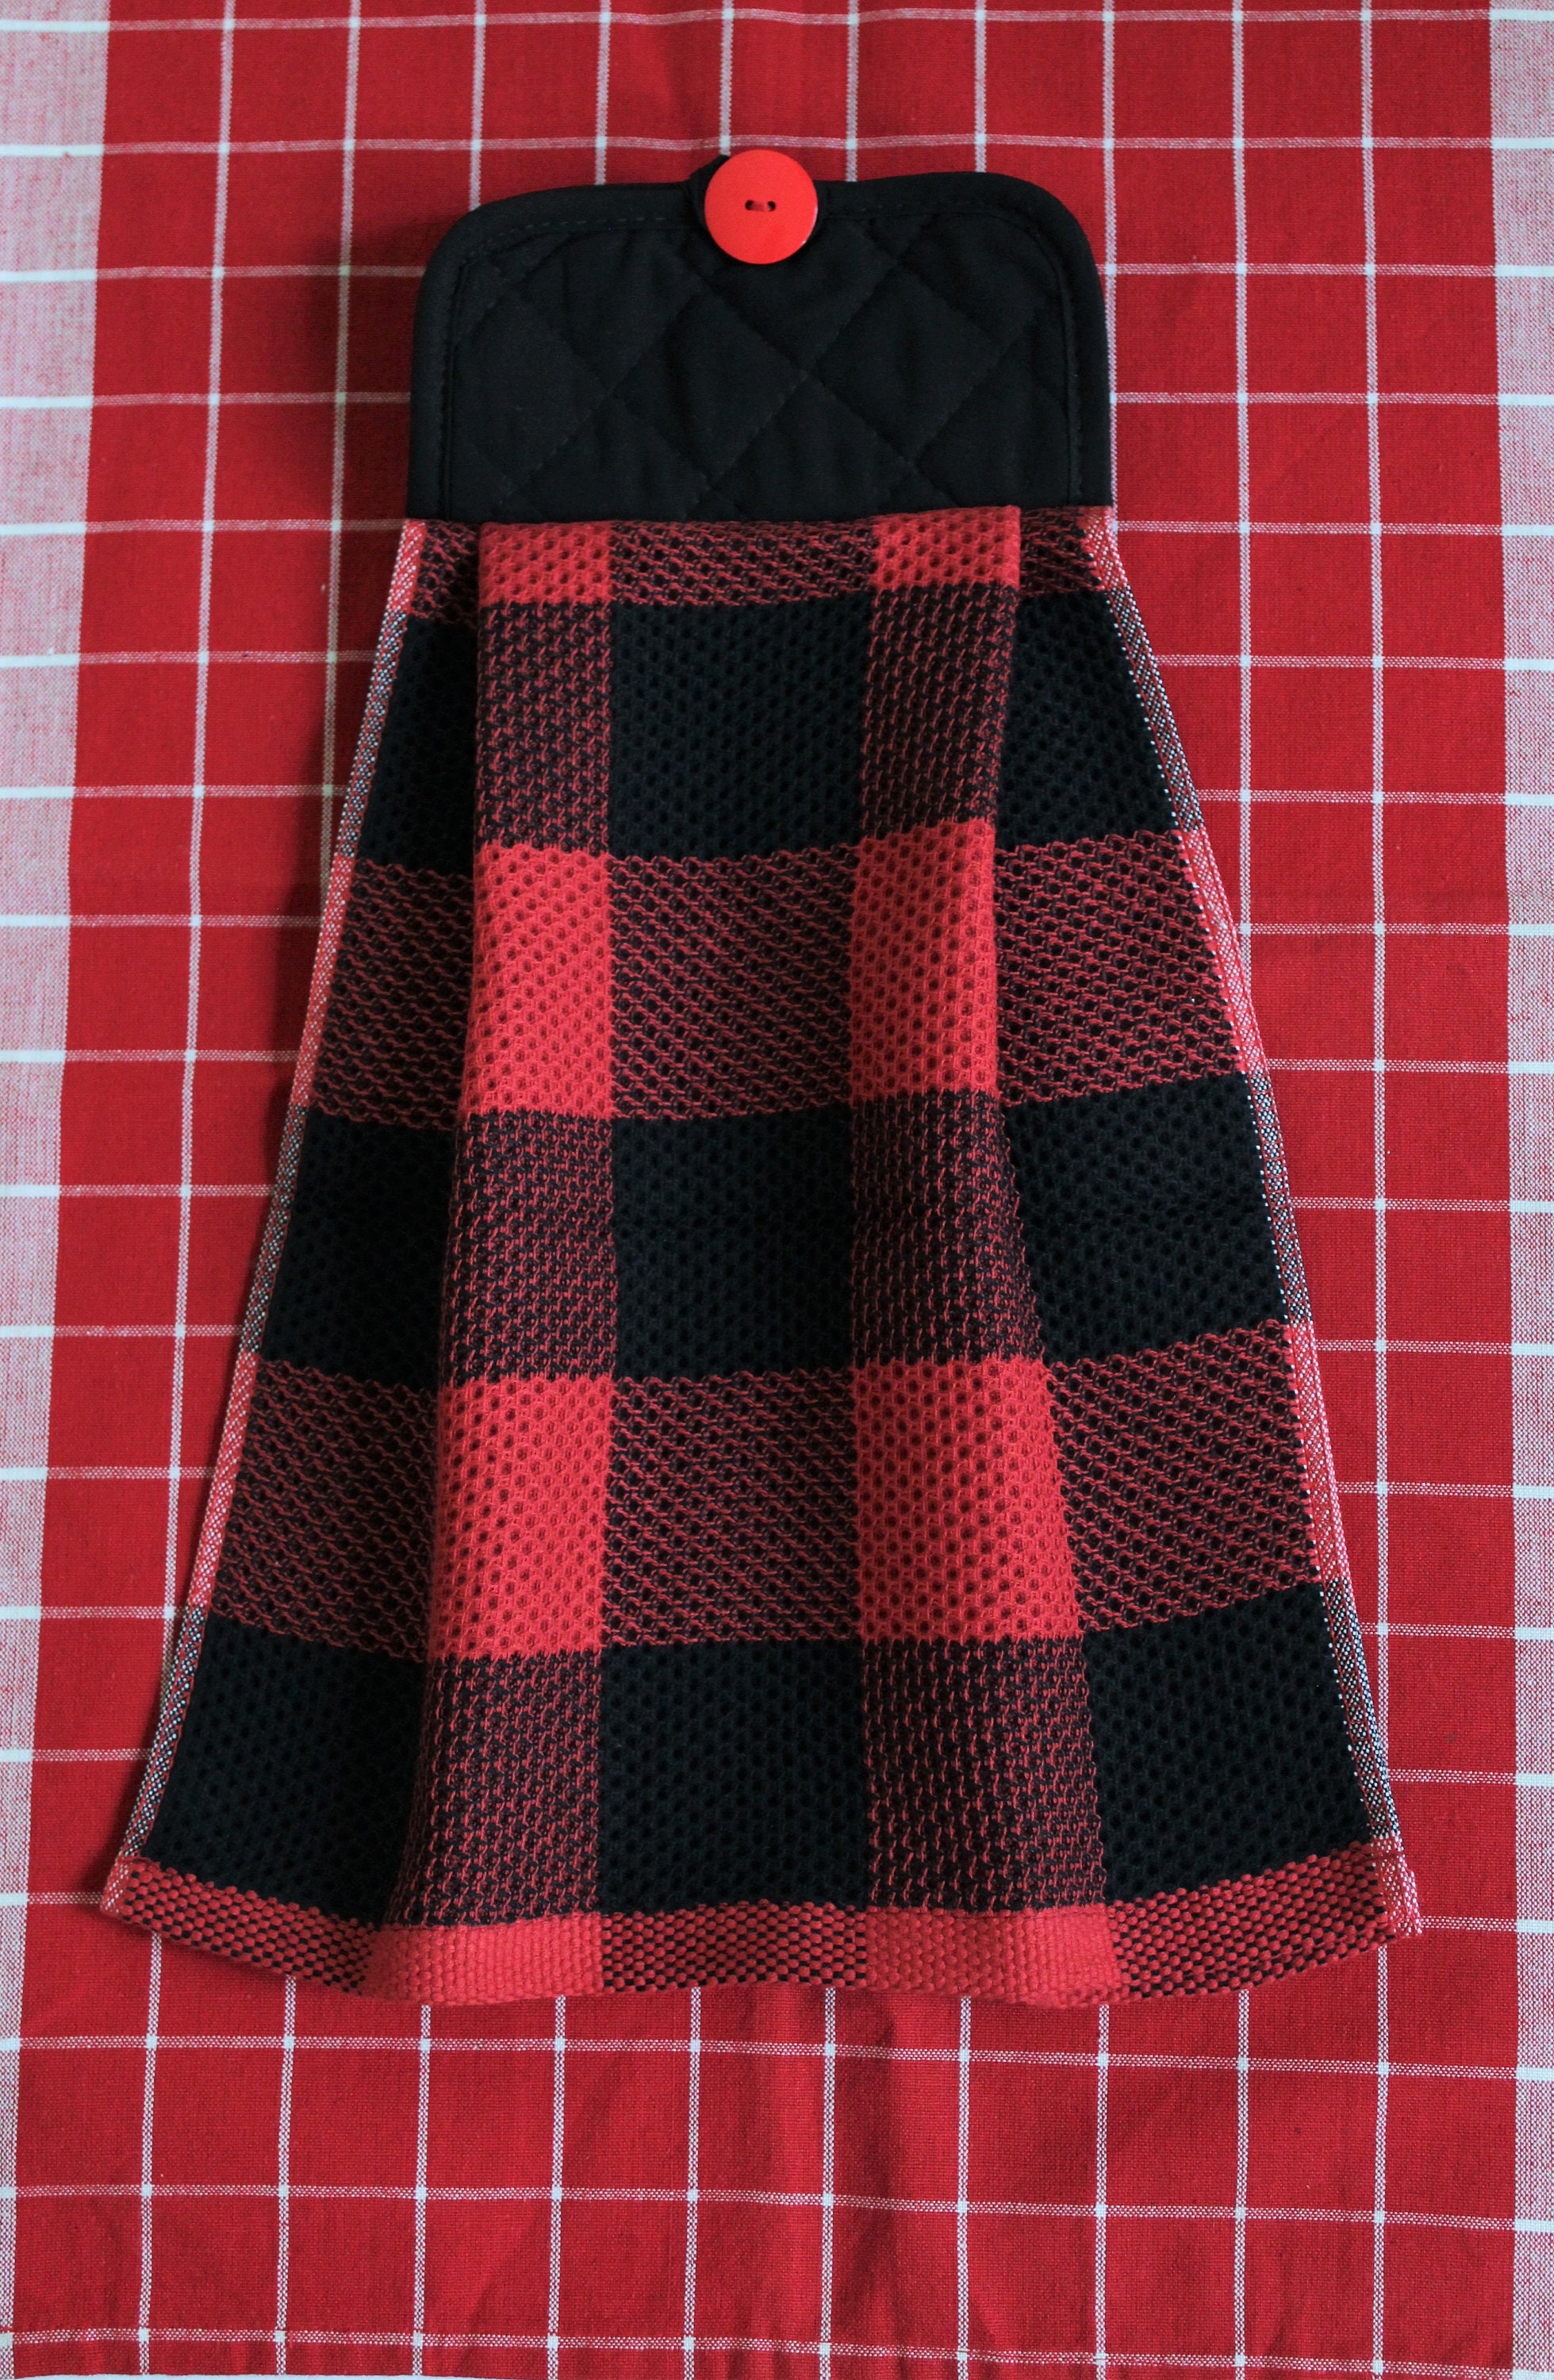 Black and Red Plaid, Red and White Plaid Hanging Kitchen Towel, Buffalo  Check, Mrsmikes Pleated Towels 